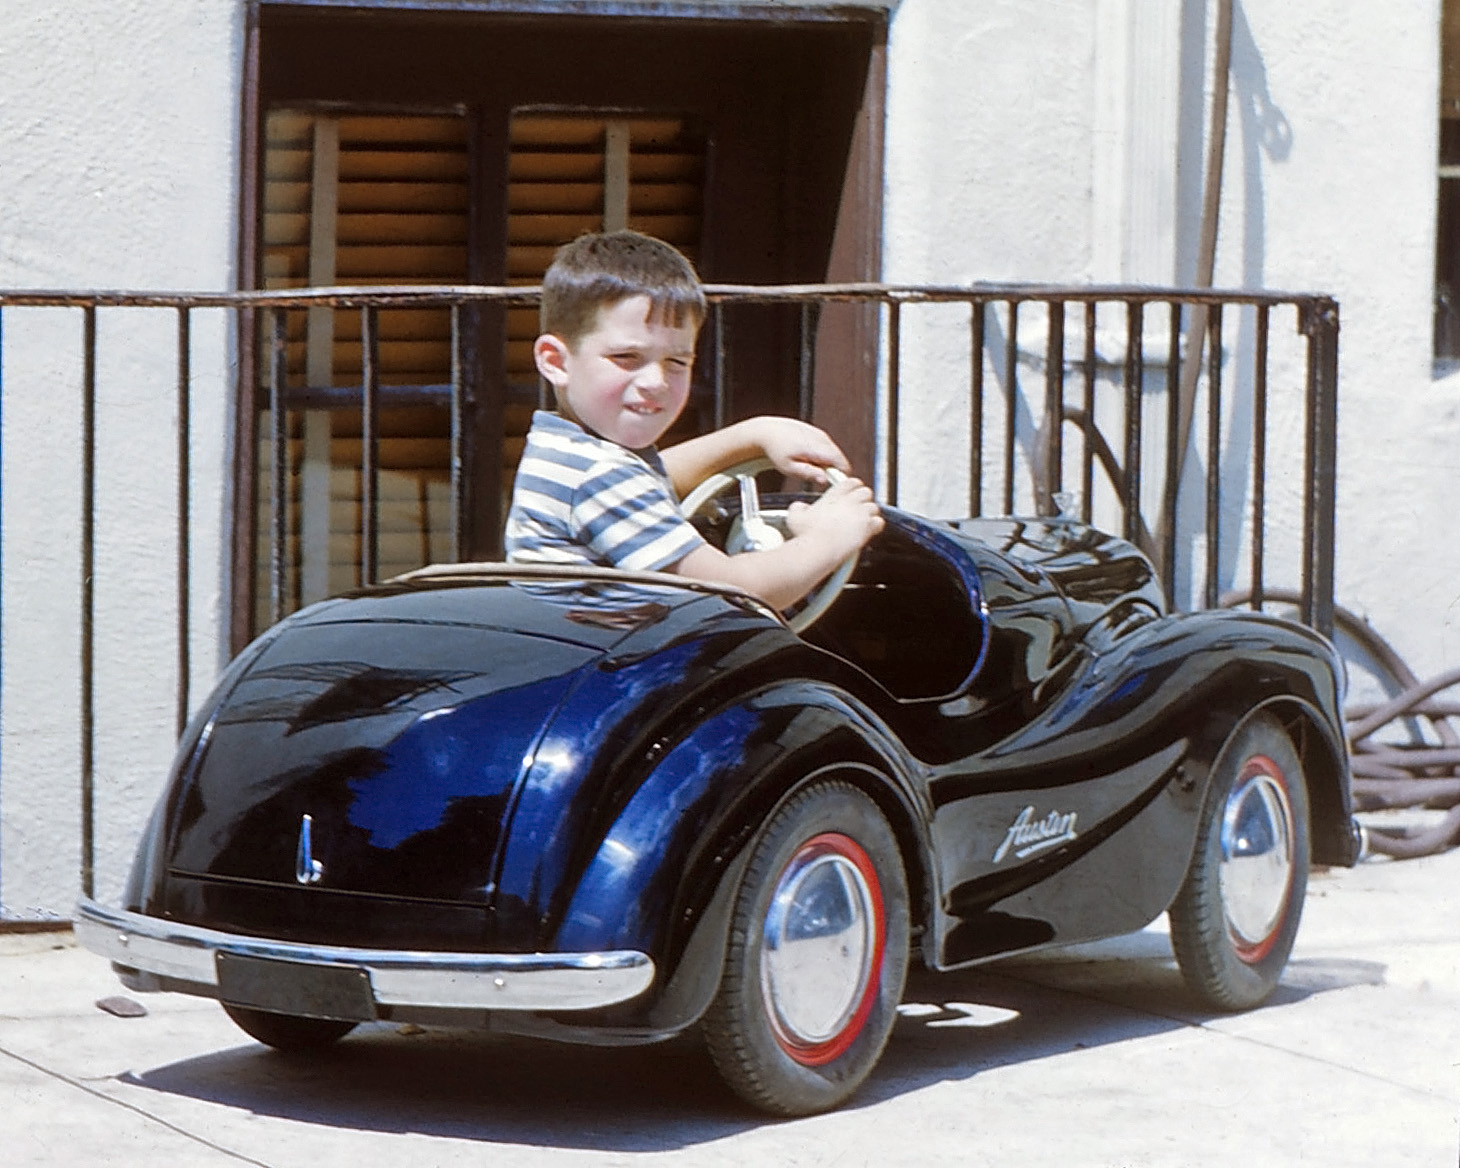 Young motorist in an Austin pedal car circa 1949. From a set of 35mm Kodachromes I acquired in northern New Jersey. Here is another view. View full size.